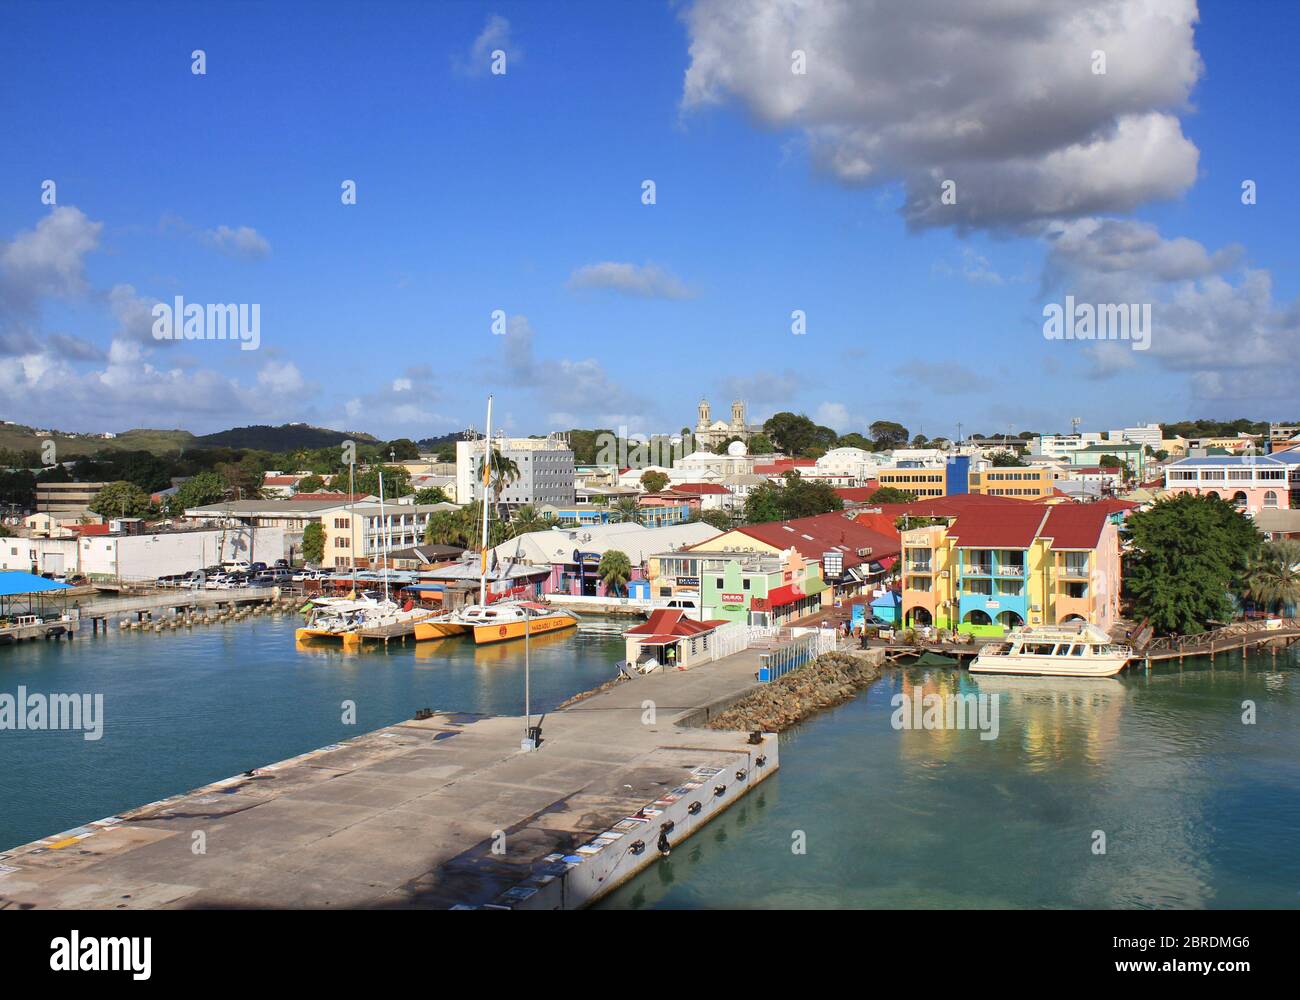 SAINT JOHN'S, ANTIGUA - FEBRUARY 19, 2014: Waterfront with pier and colorful houses in St John's, Antigua and Barbuda. Antigua is a popular destinatio Stock Photo